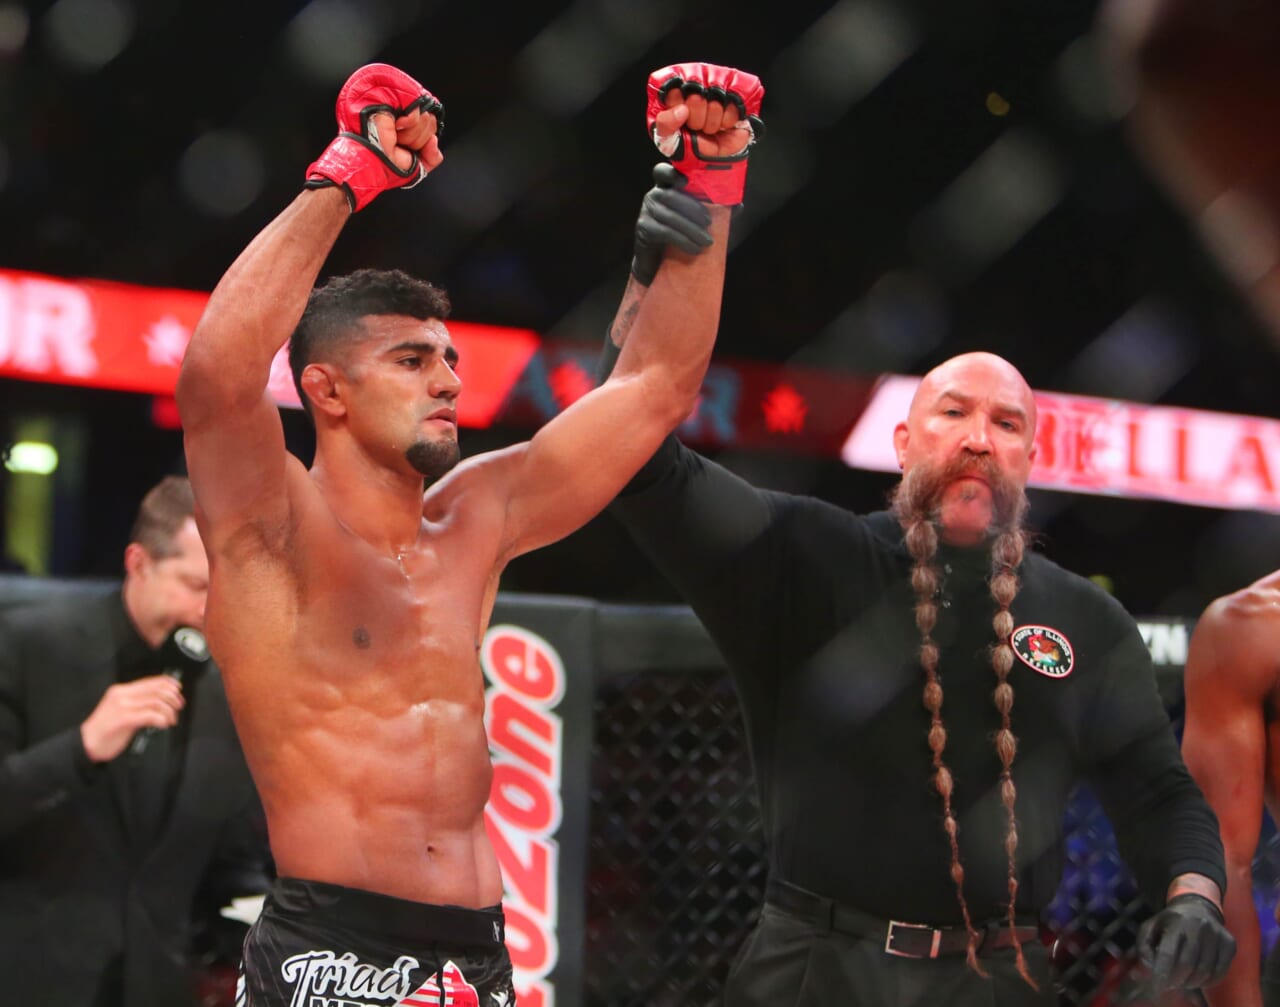 Bellator: Douglas Lima and Gegard Mousasi to battle for the middleweight crown